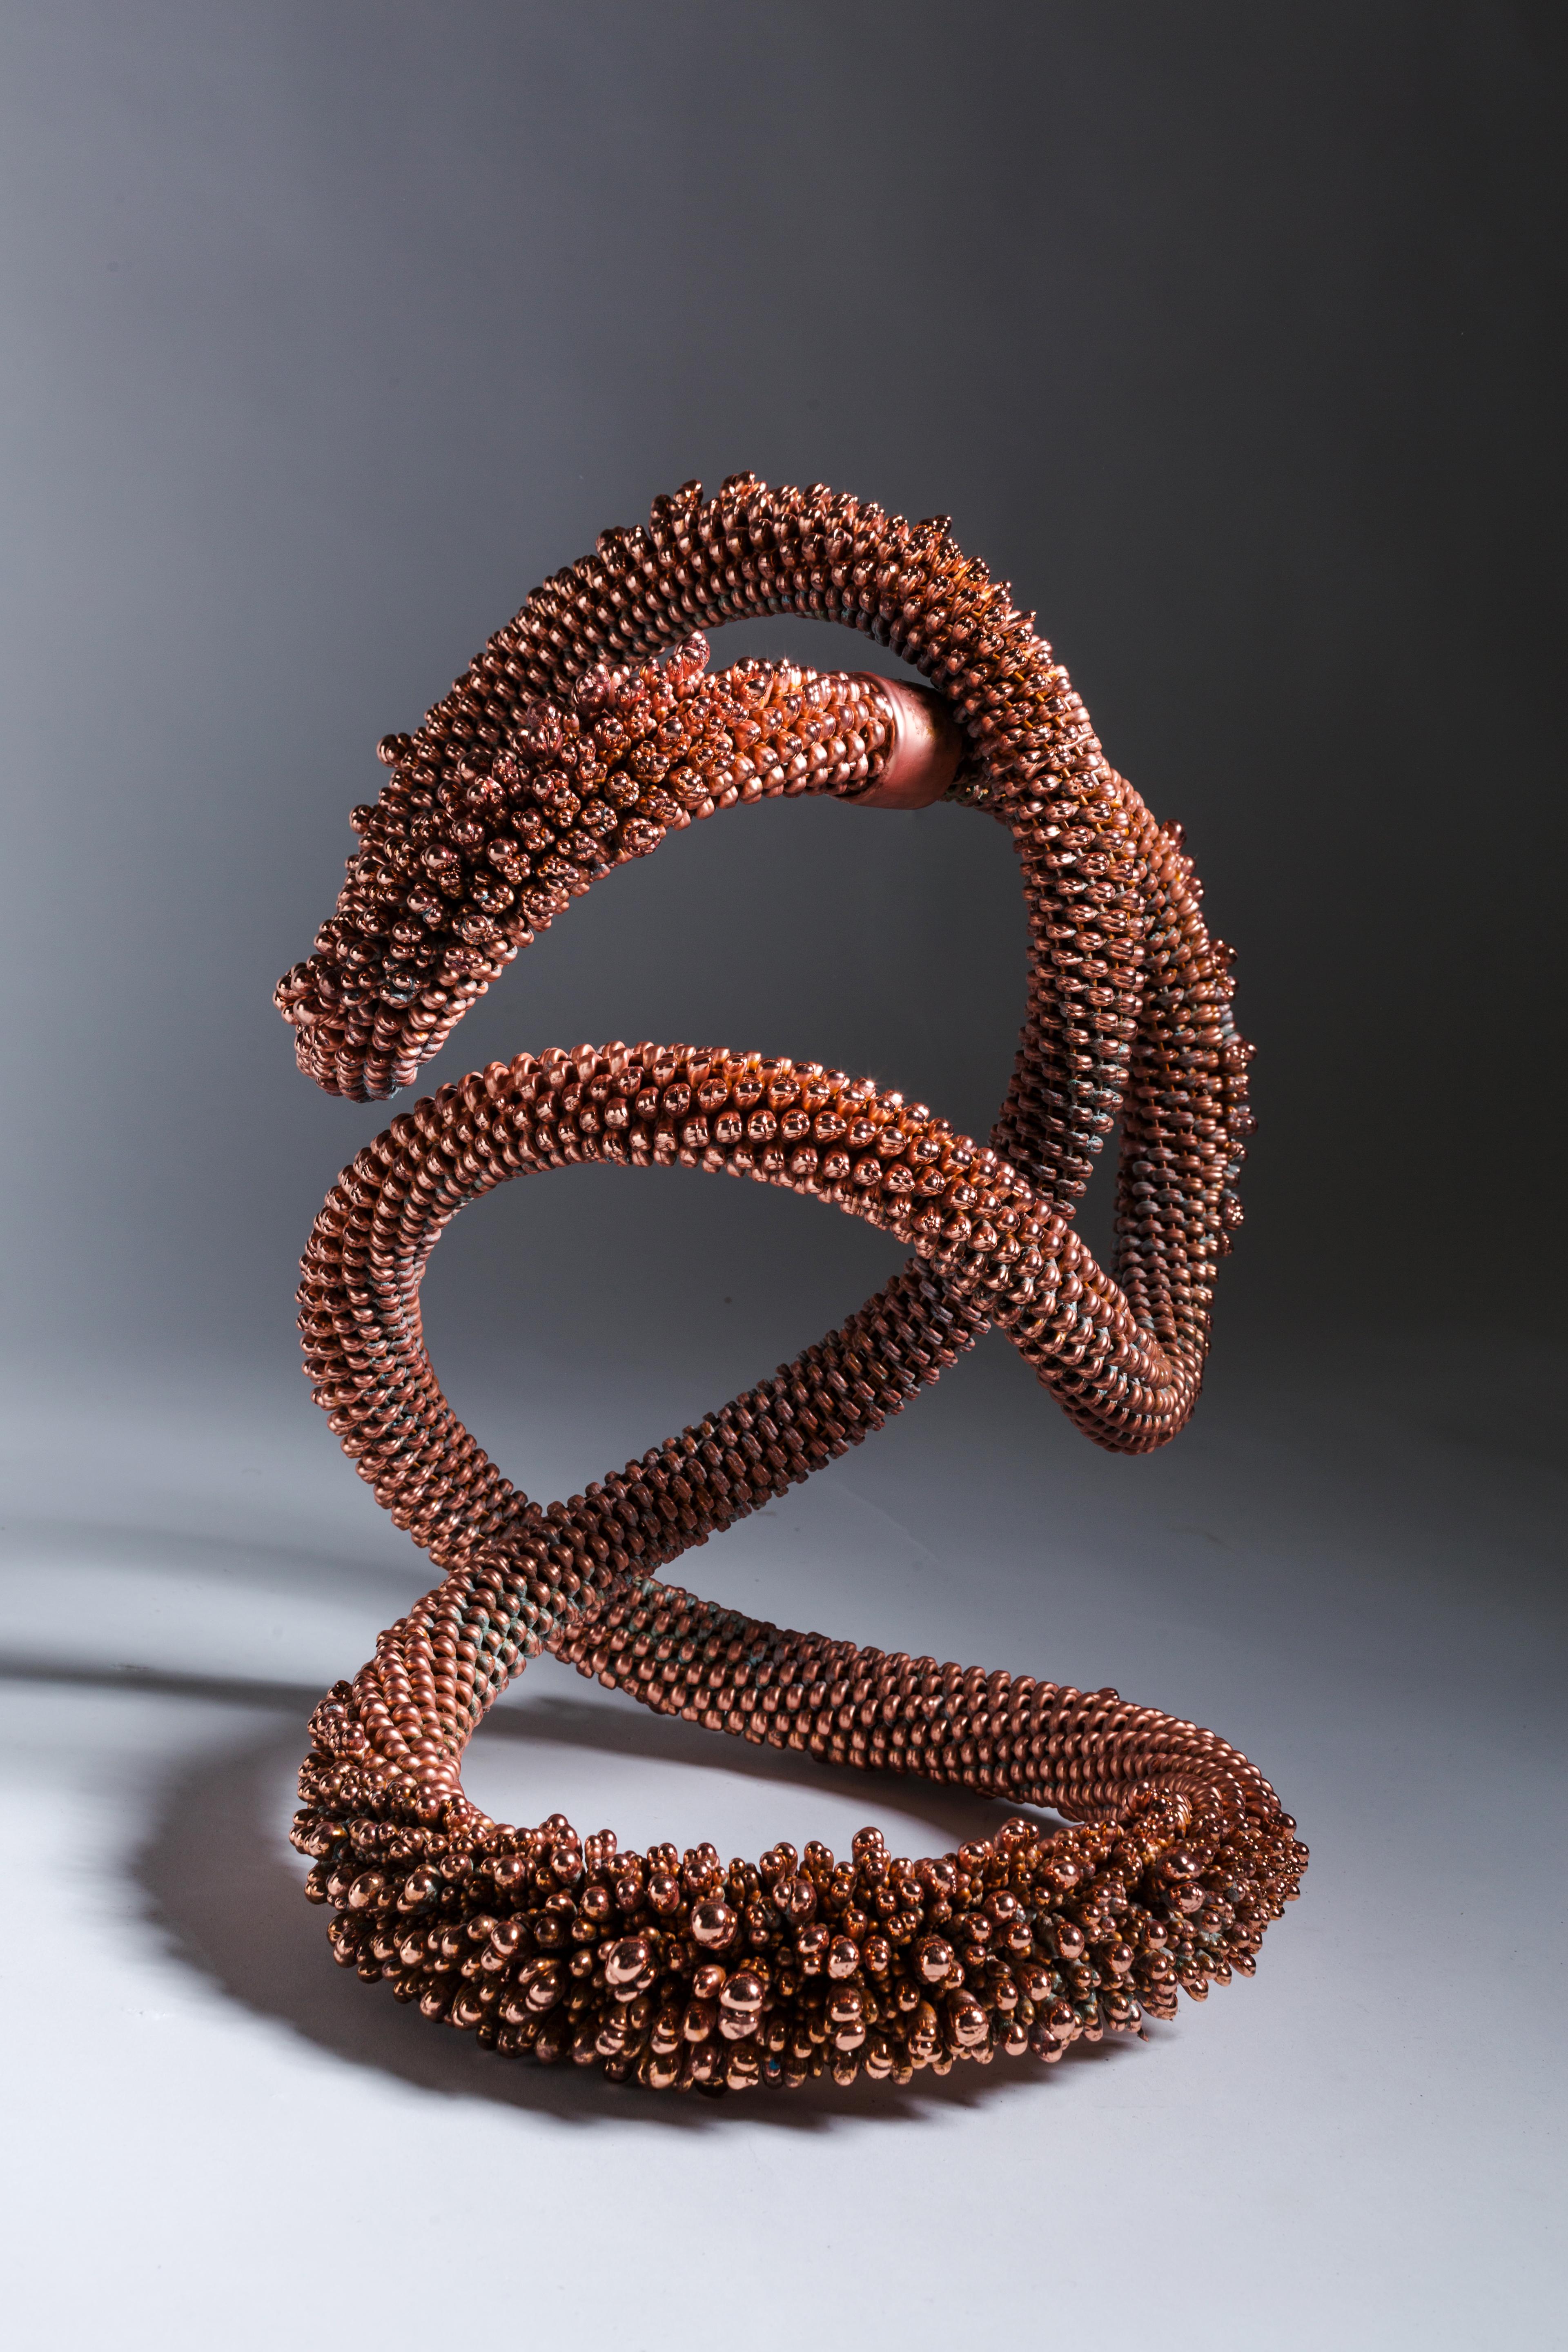 Copper, Crystal, Polished, Raw, Abstract, Contemporary, Modern, Art - Beige Abstract Sculpture by Driaan Claassen